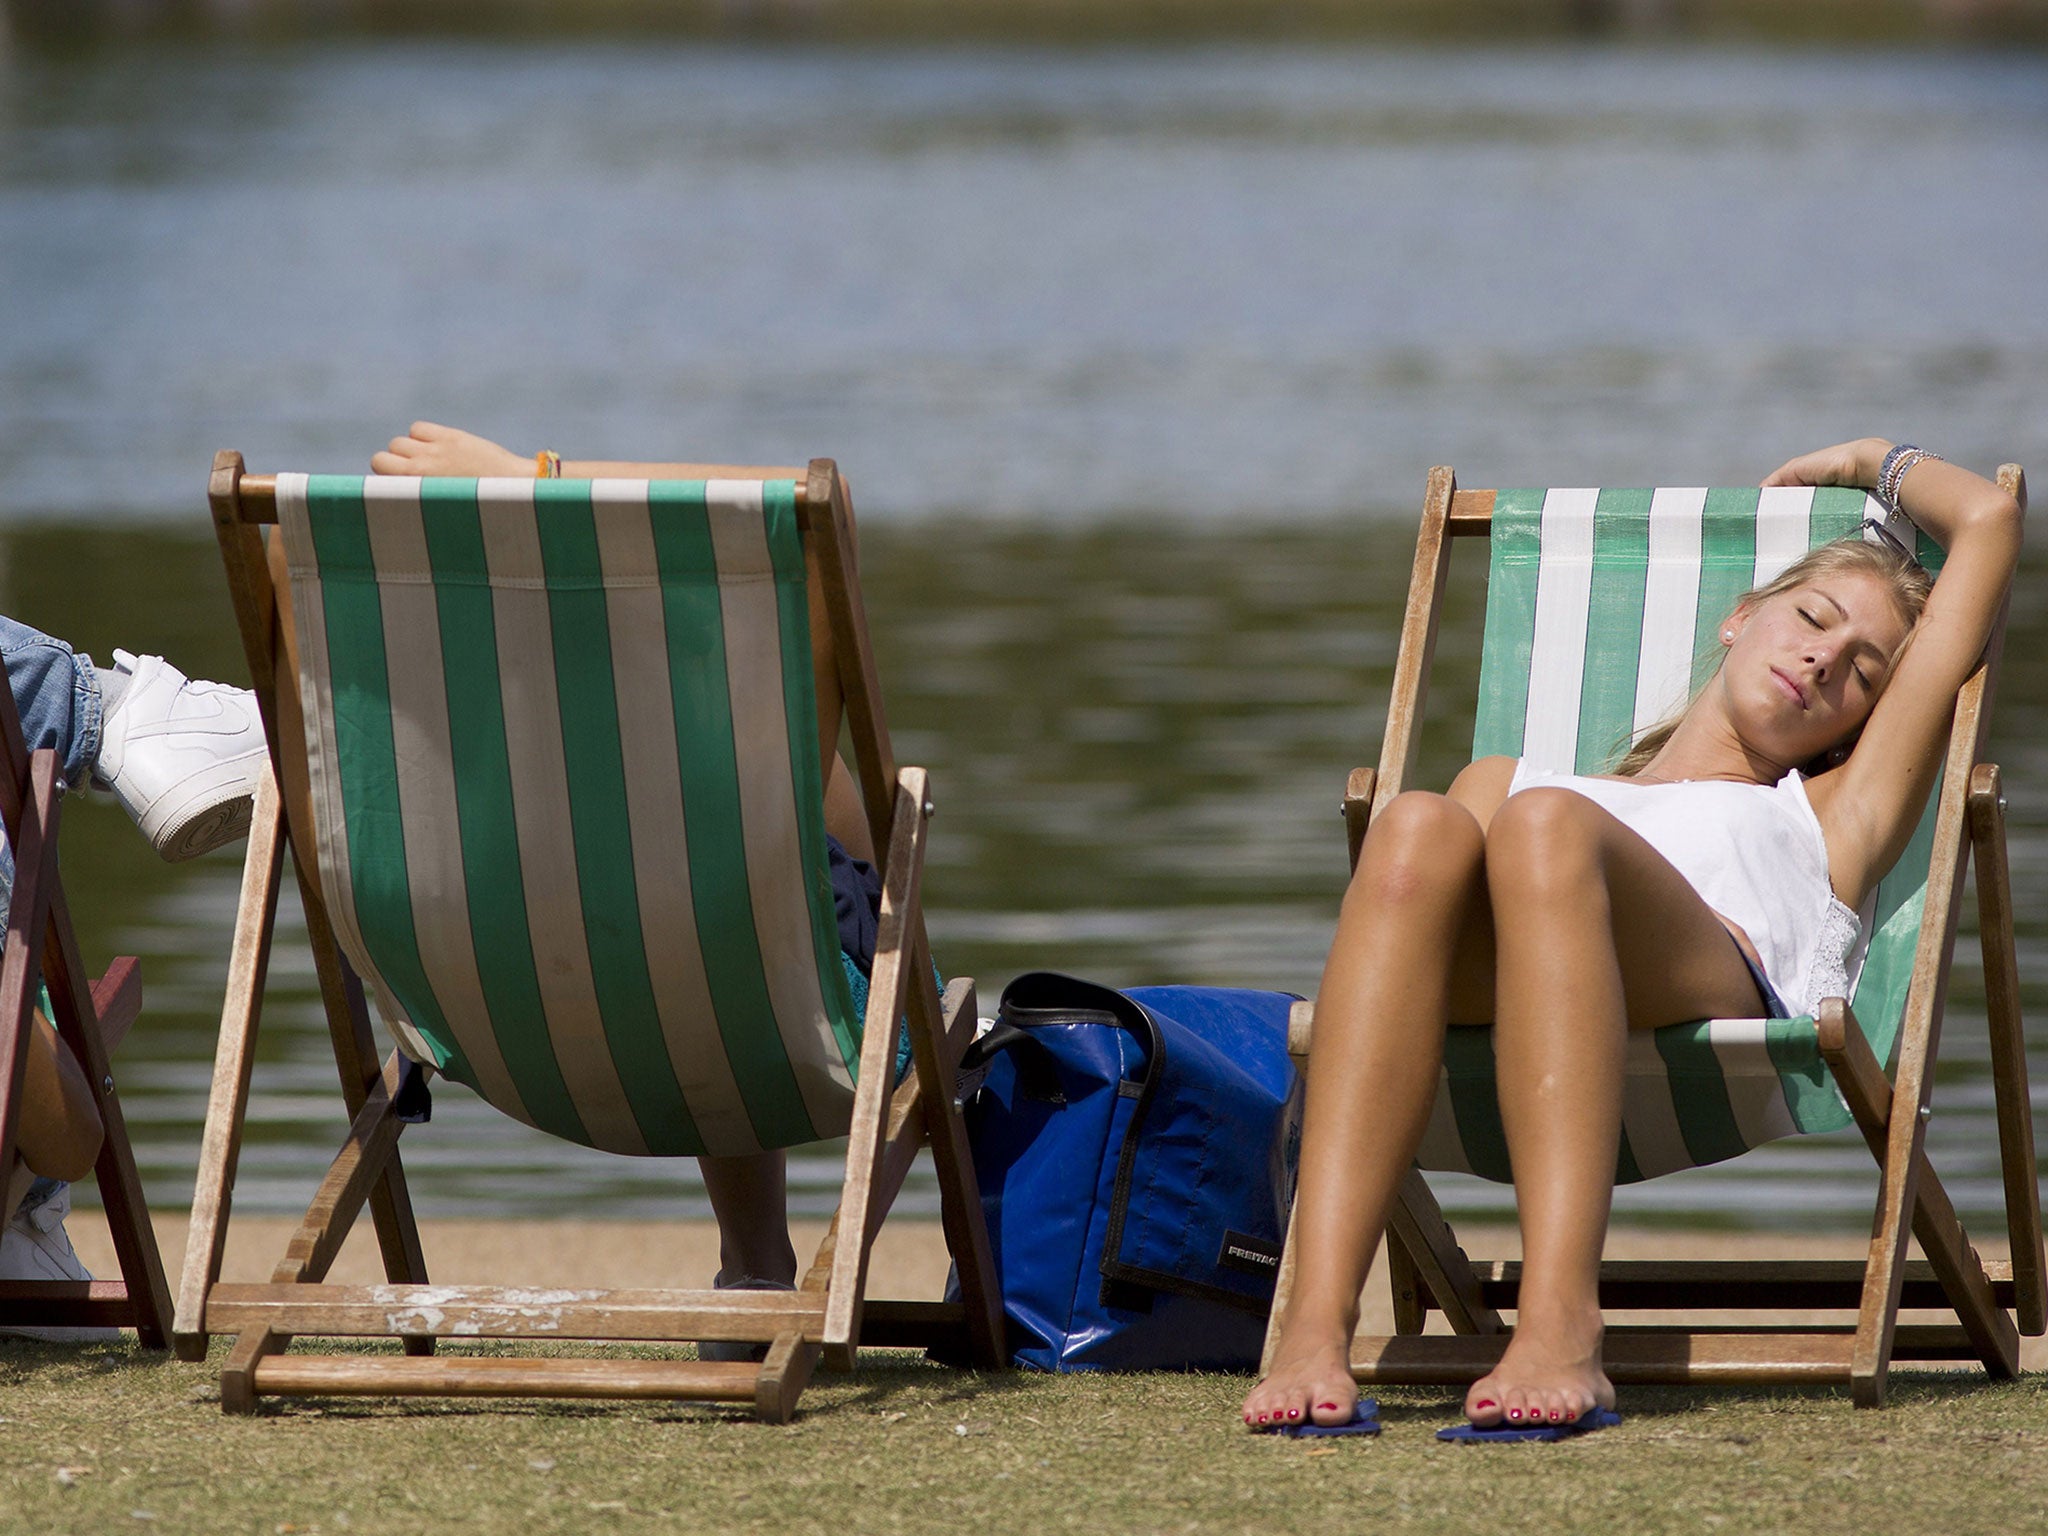 A more conventional place to use a deckchair, by the Serpentine in Hyde Park, central London